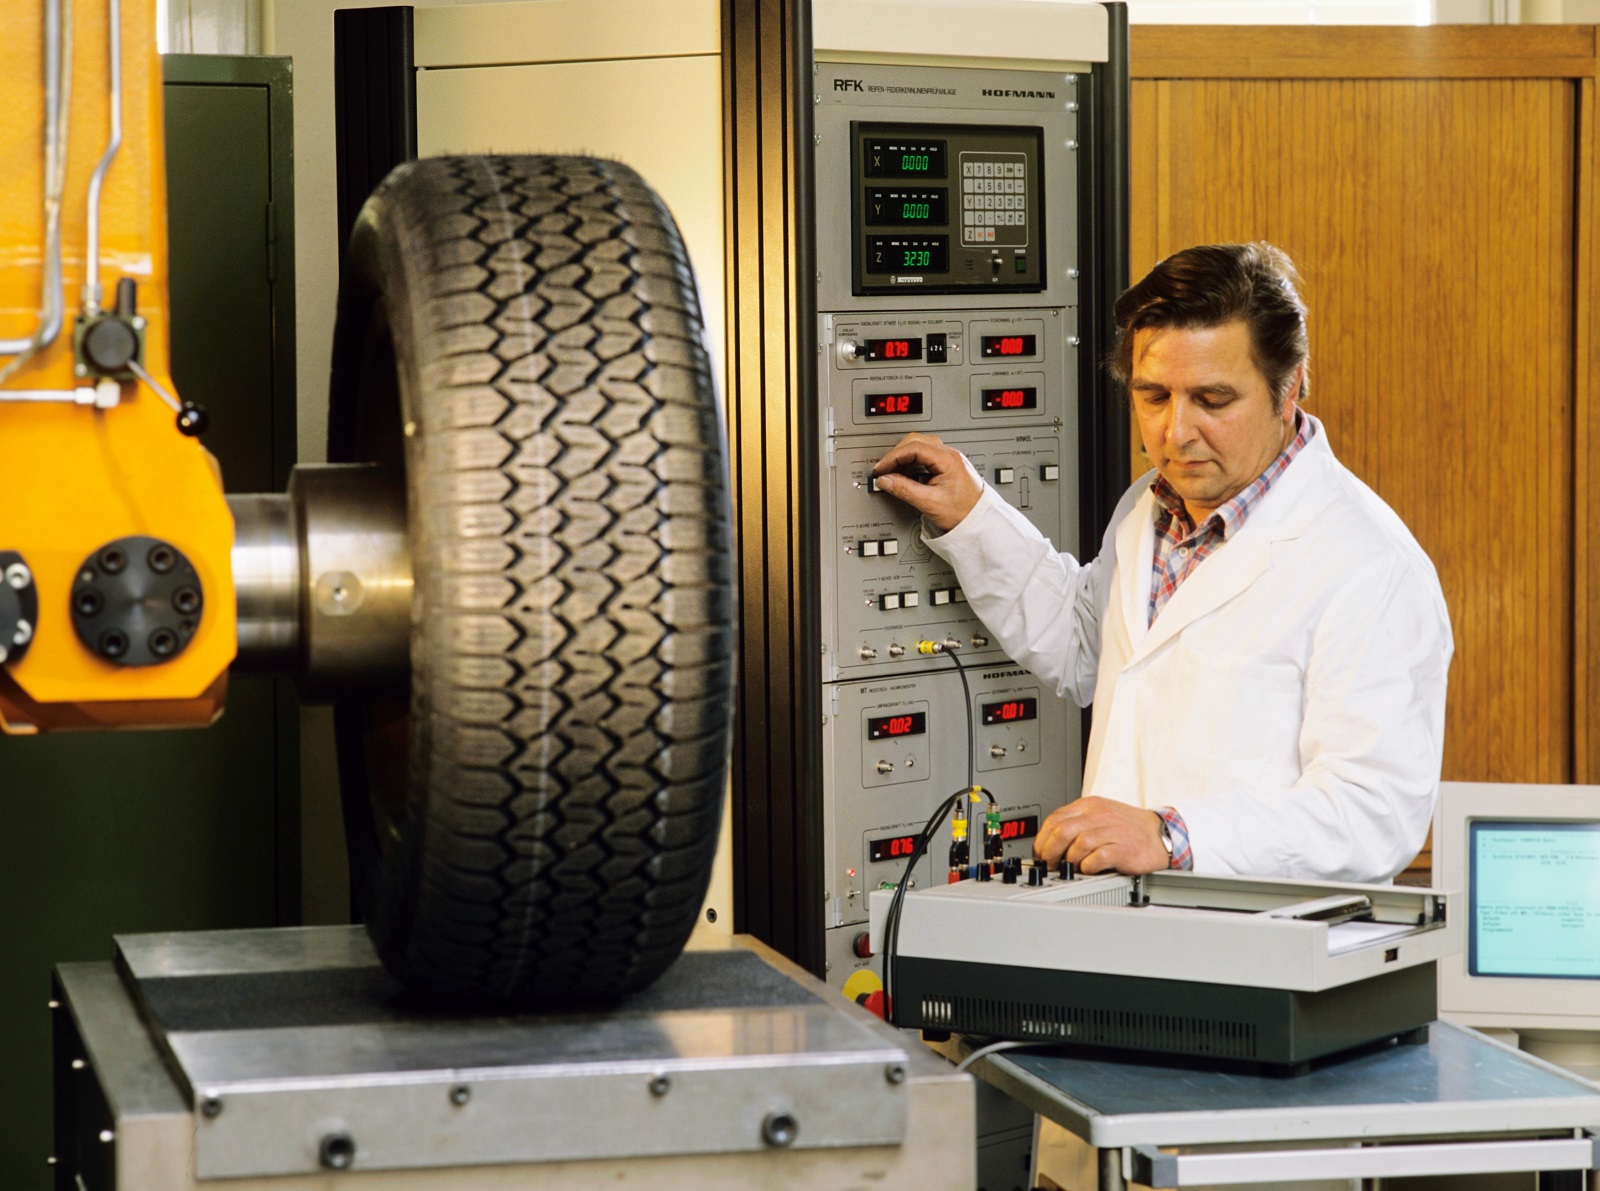 MODEL RELEASED. Tyre testing at a tyre manufacturing plant. Photographed in Germany., Image: 103025161, License: Rights-managed, Restrictions: , Model Release: yes, Credit line: Science Photo Library / Sciencephoto / Profimedia